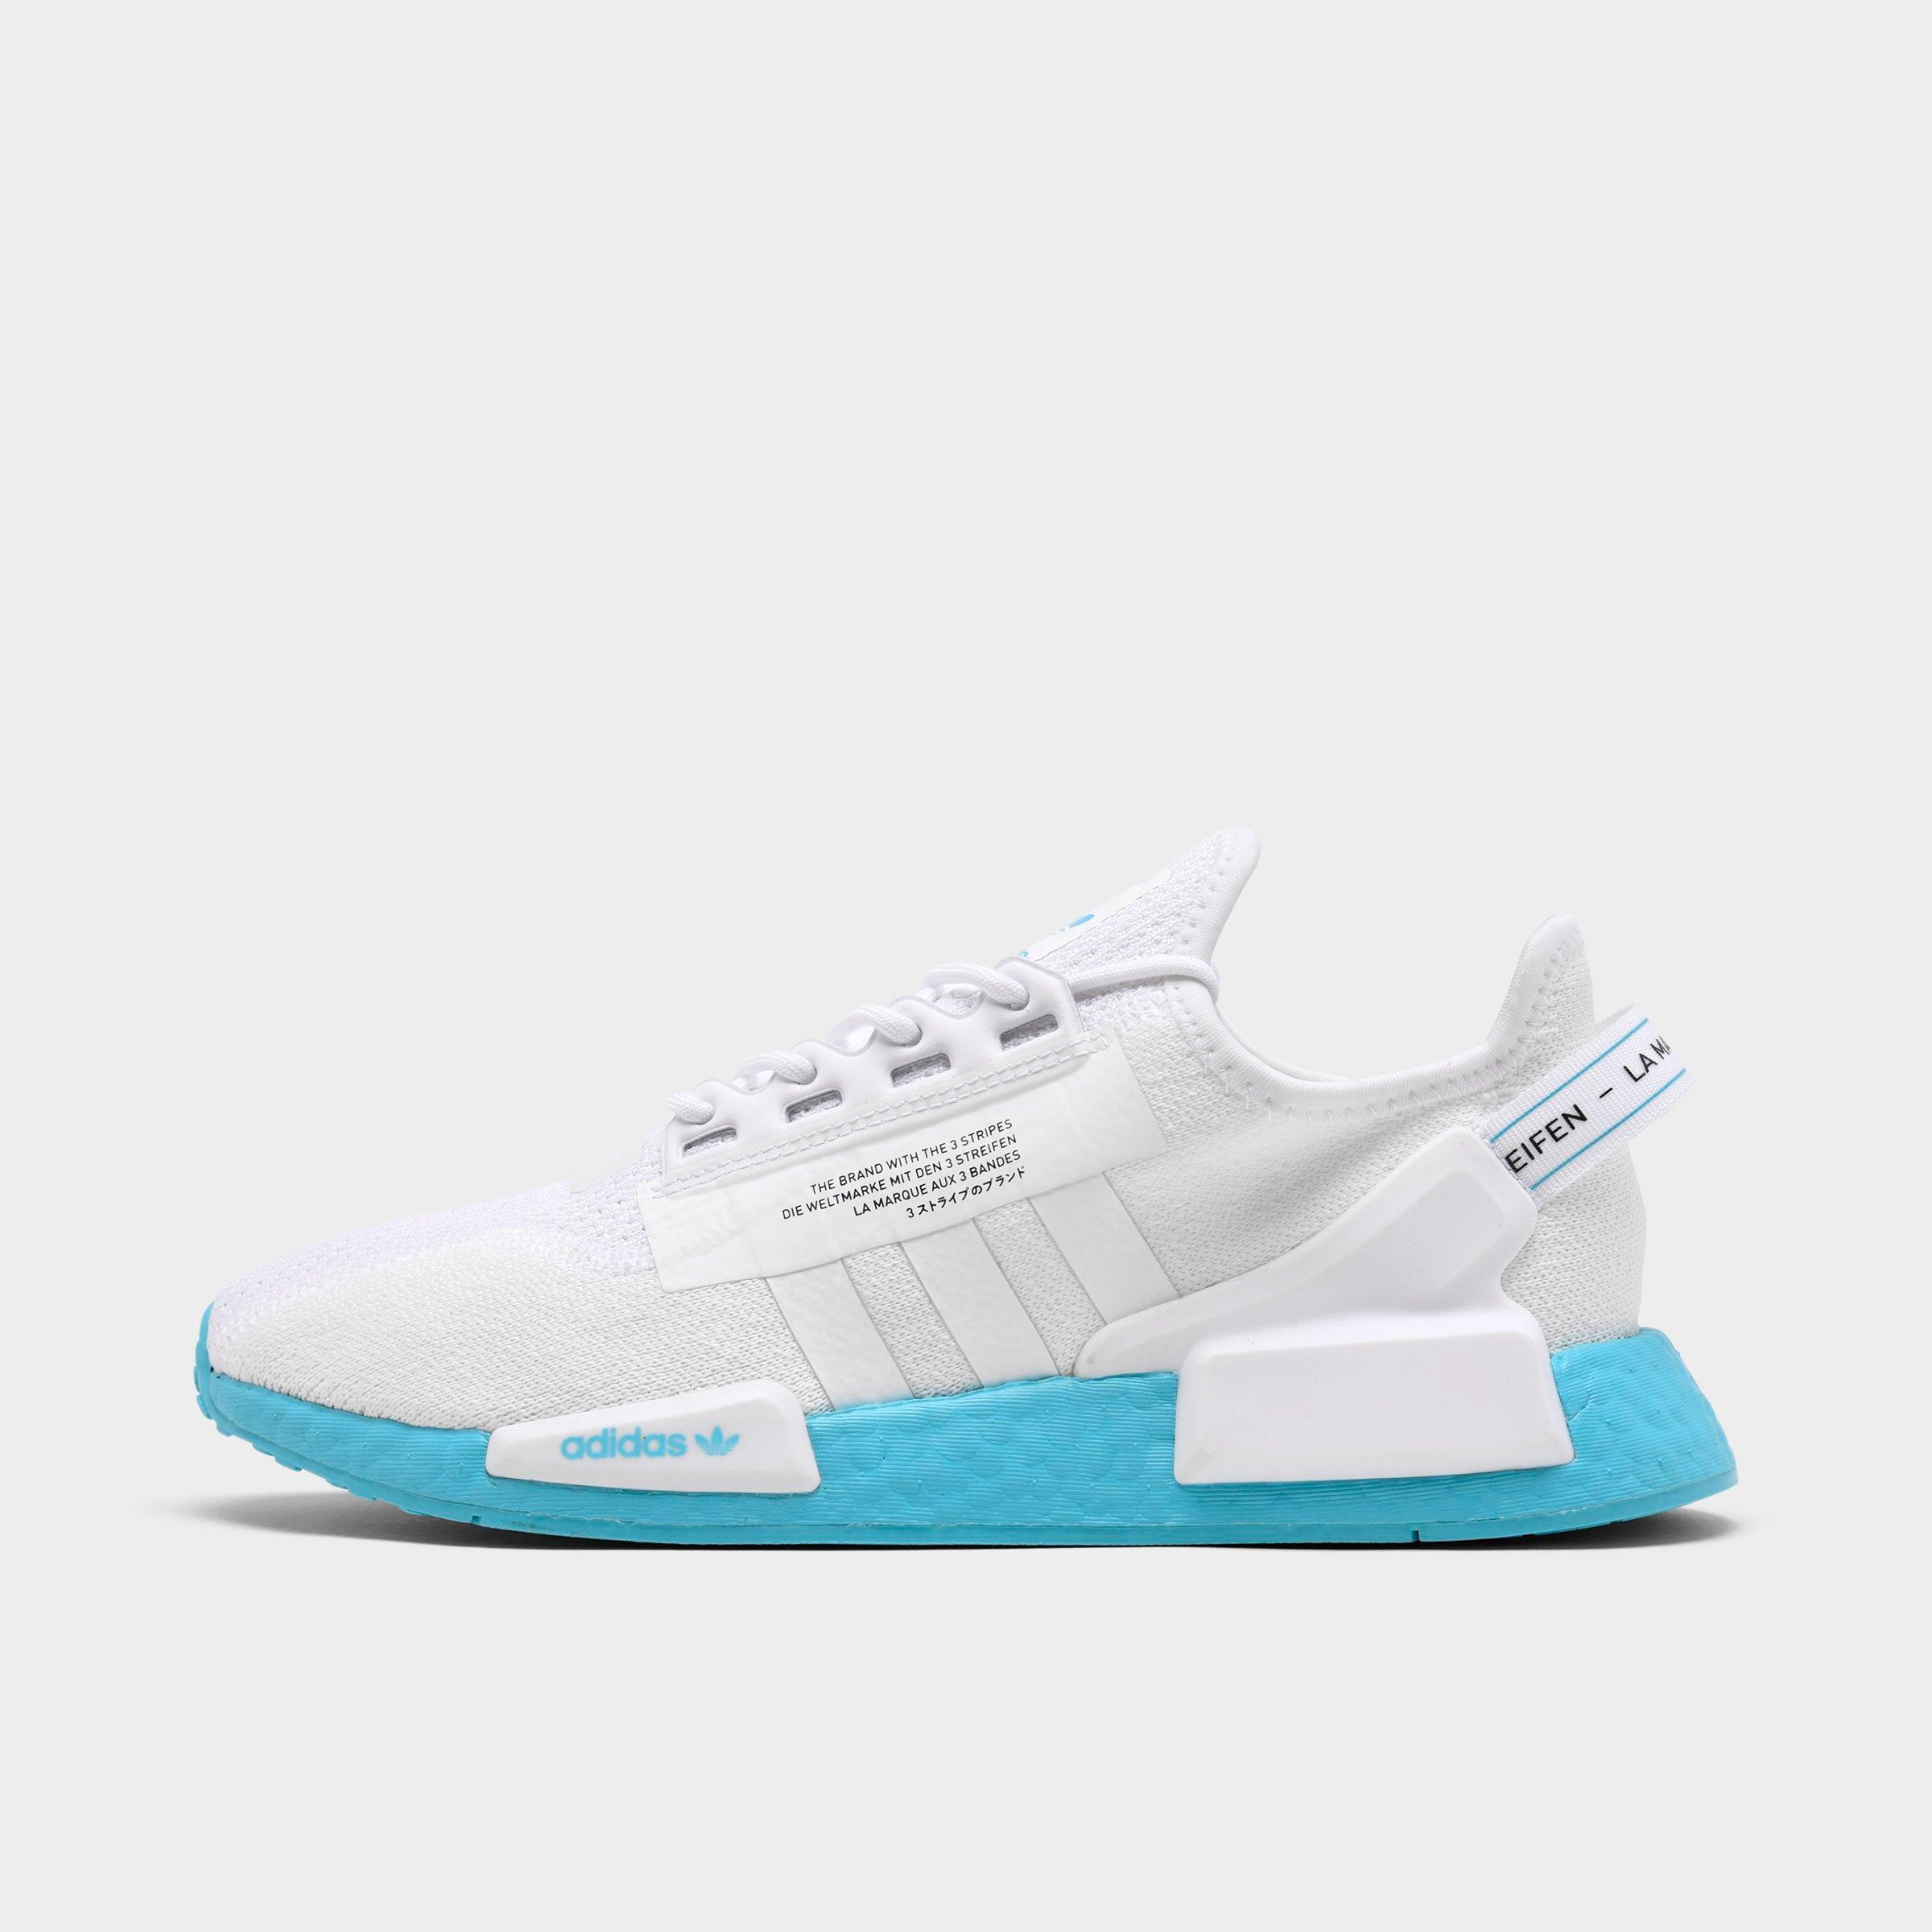 Paris NMD NMD R1 Trainers Shoes adidas uk